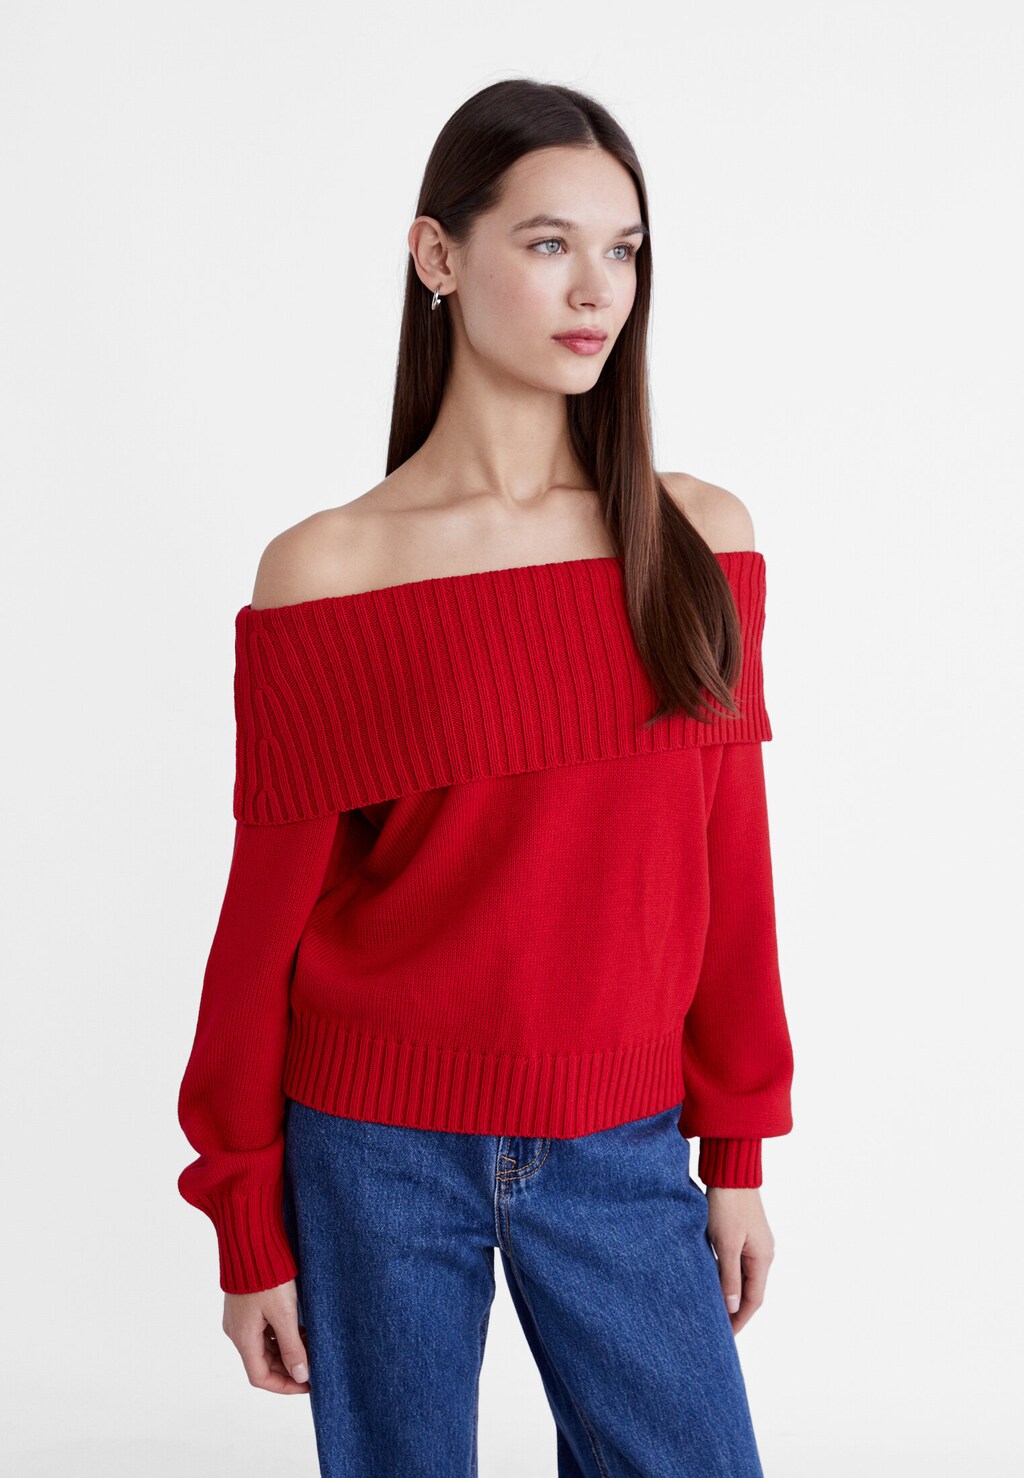 Stradivarius cable knitted super cropped jumper in grey